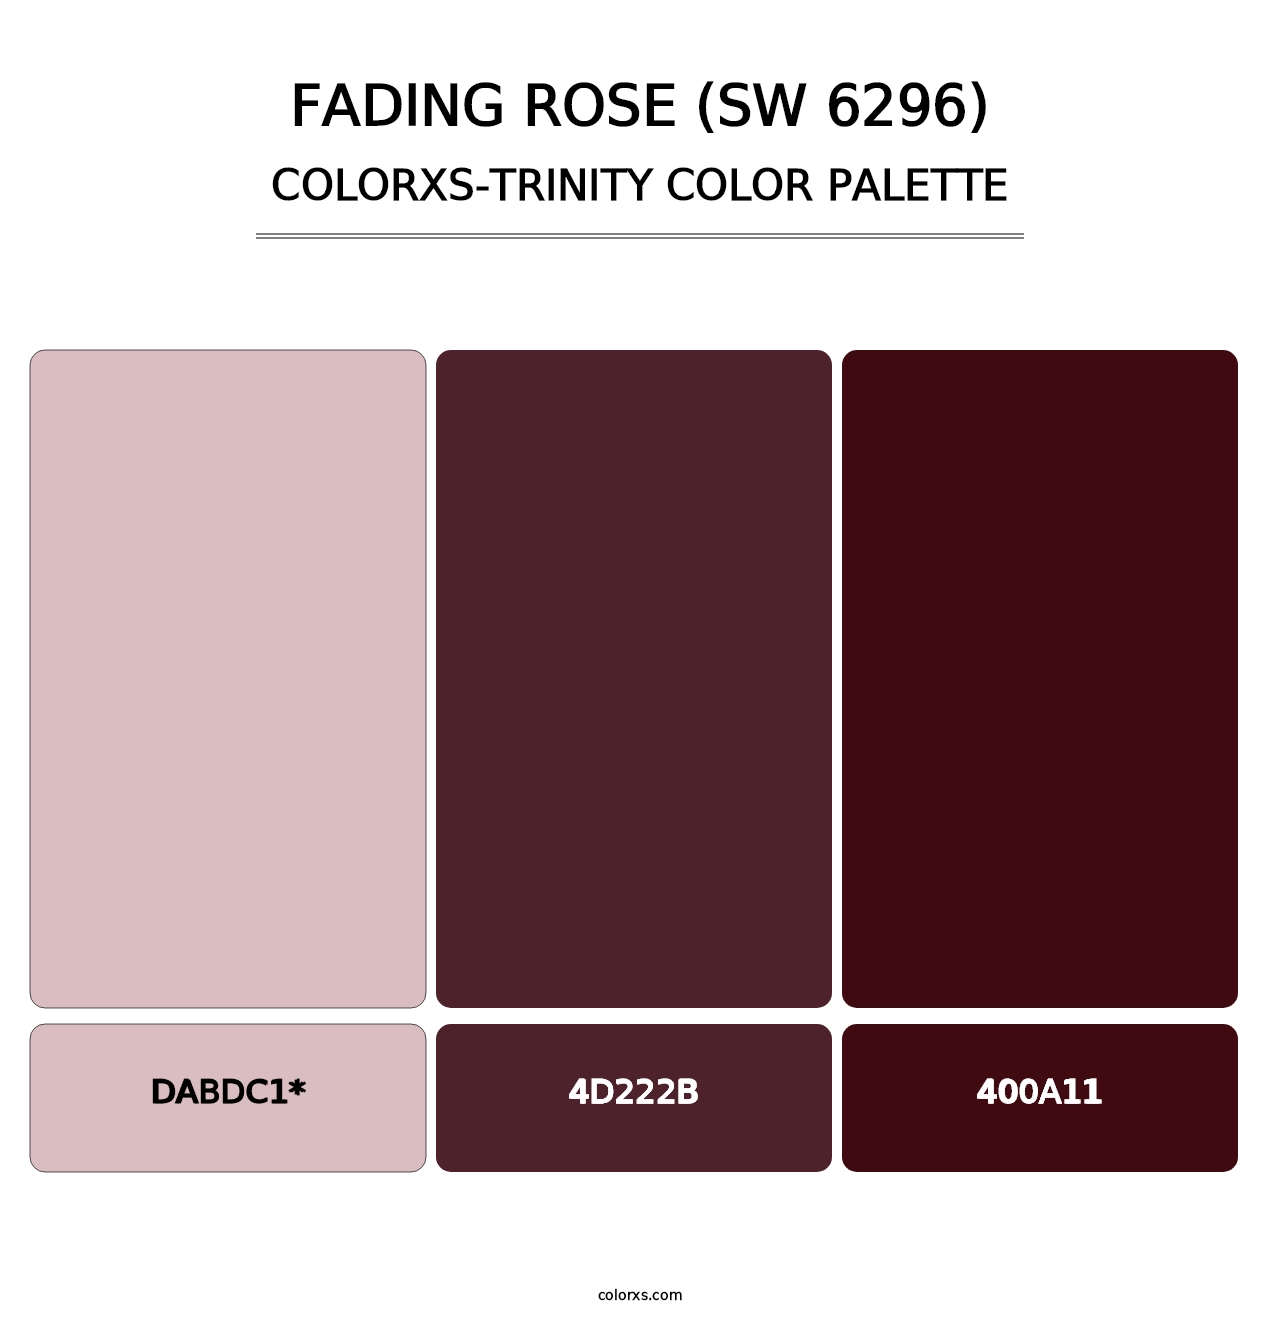 Fading Rose (SW 6296) - Colorxs Trinity Palette